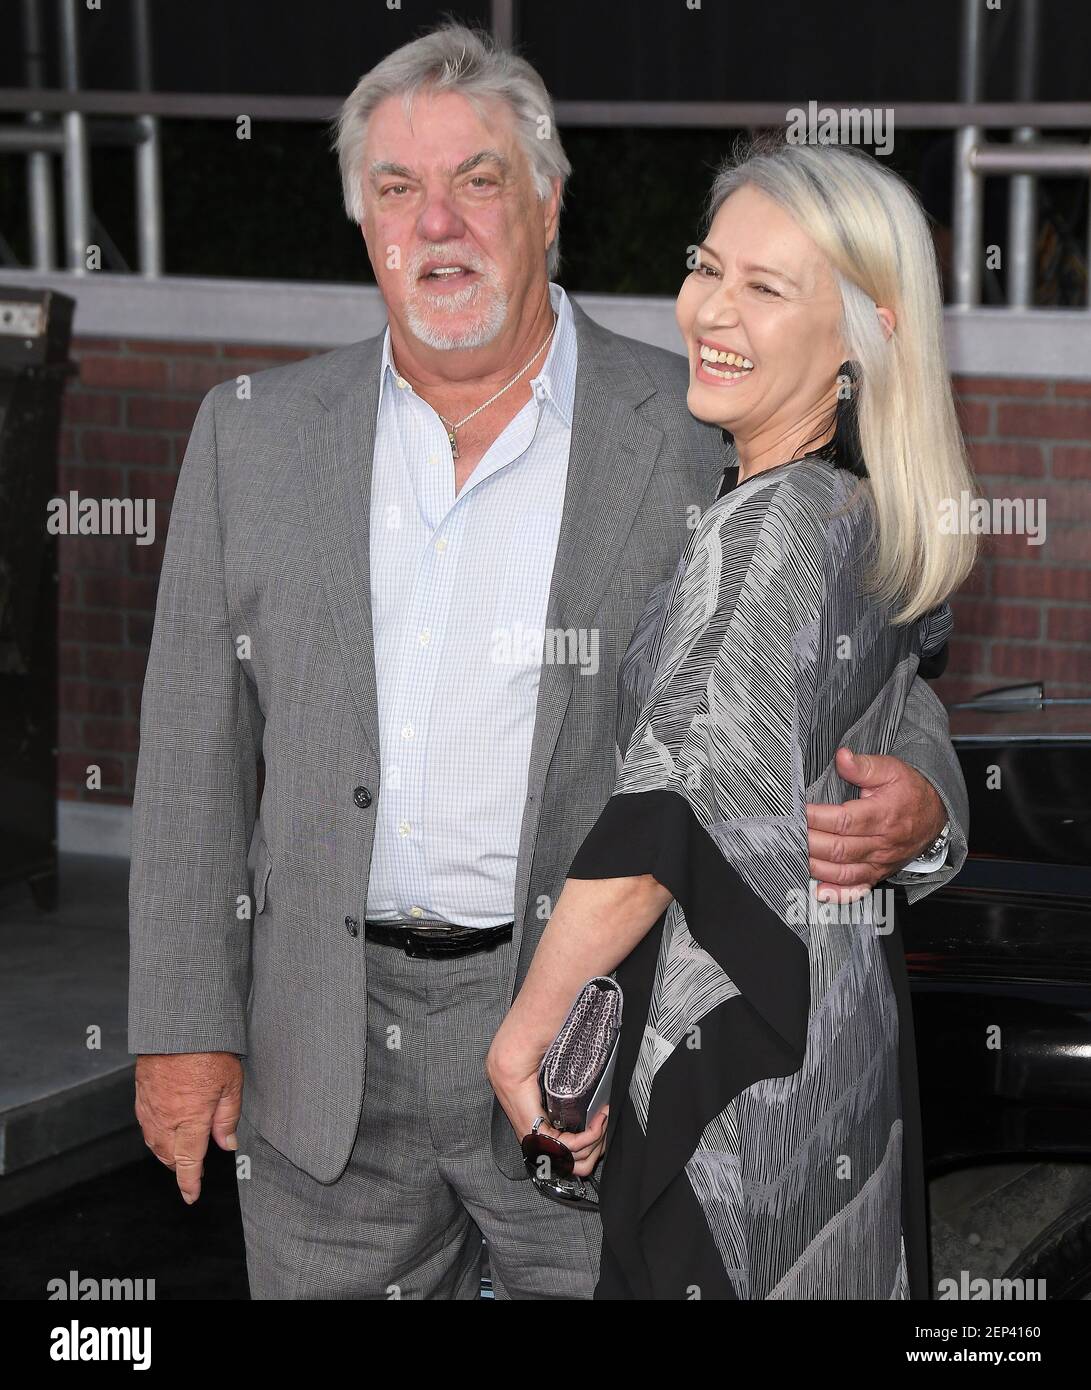 L-R) Bruce McGill and Gloria Lee at THE IRISHMAN Los Angeles Premiere held  at the TCL Chinese Theatre in Hollywood, CA on Thursday, October 24, 2019.  (Photo By Sthanlee B. Mirador/Sipa USA